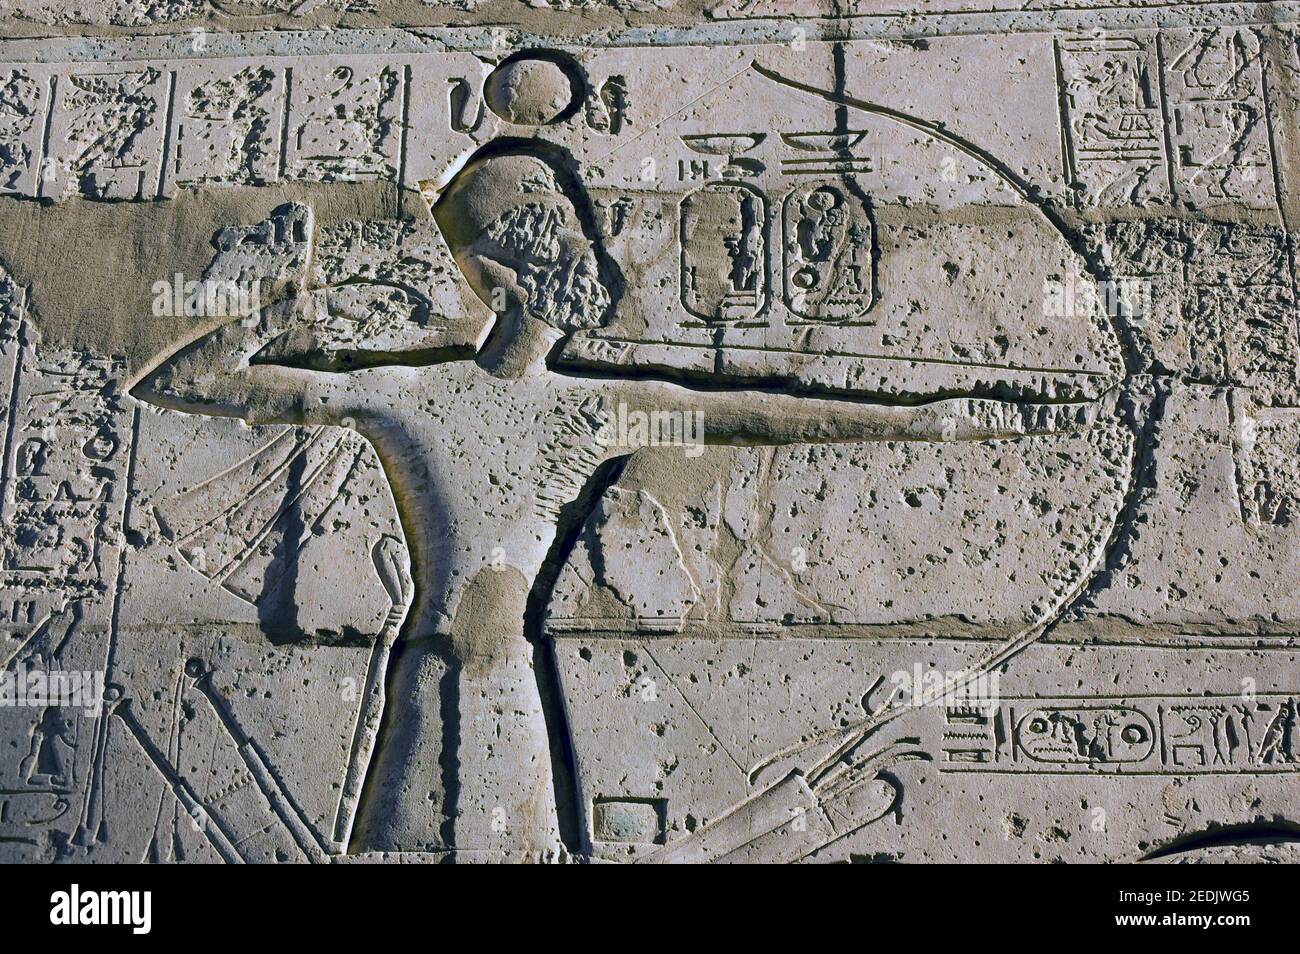 Stone carved frieze of the Ancient Egyptian Pharaoh Ramses II firing a bow and arrow. Second pylon of the Ramesseum at Luxor, Egypt. Stock Photo